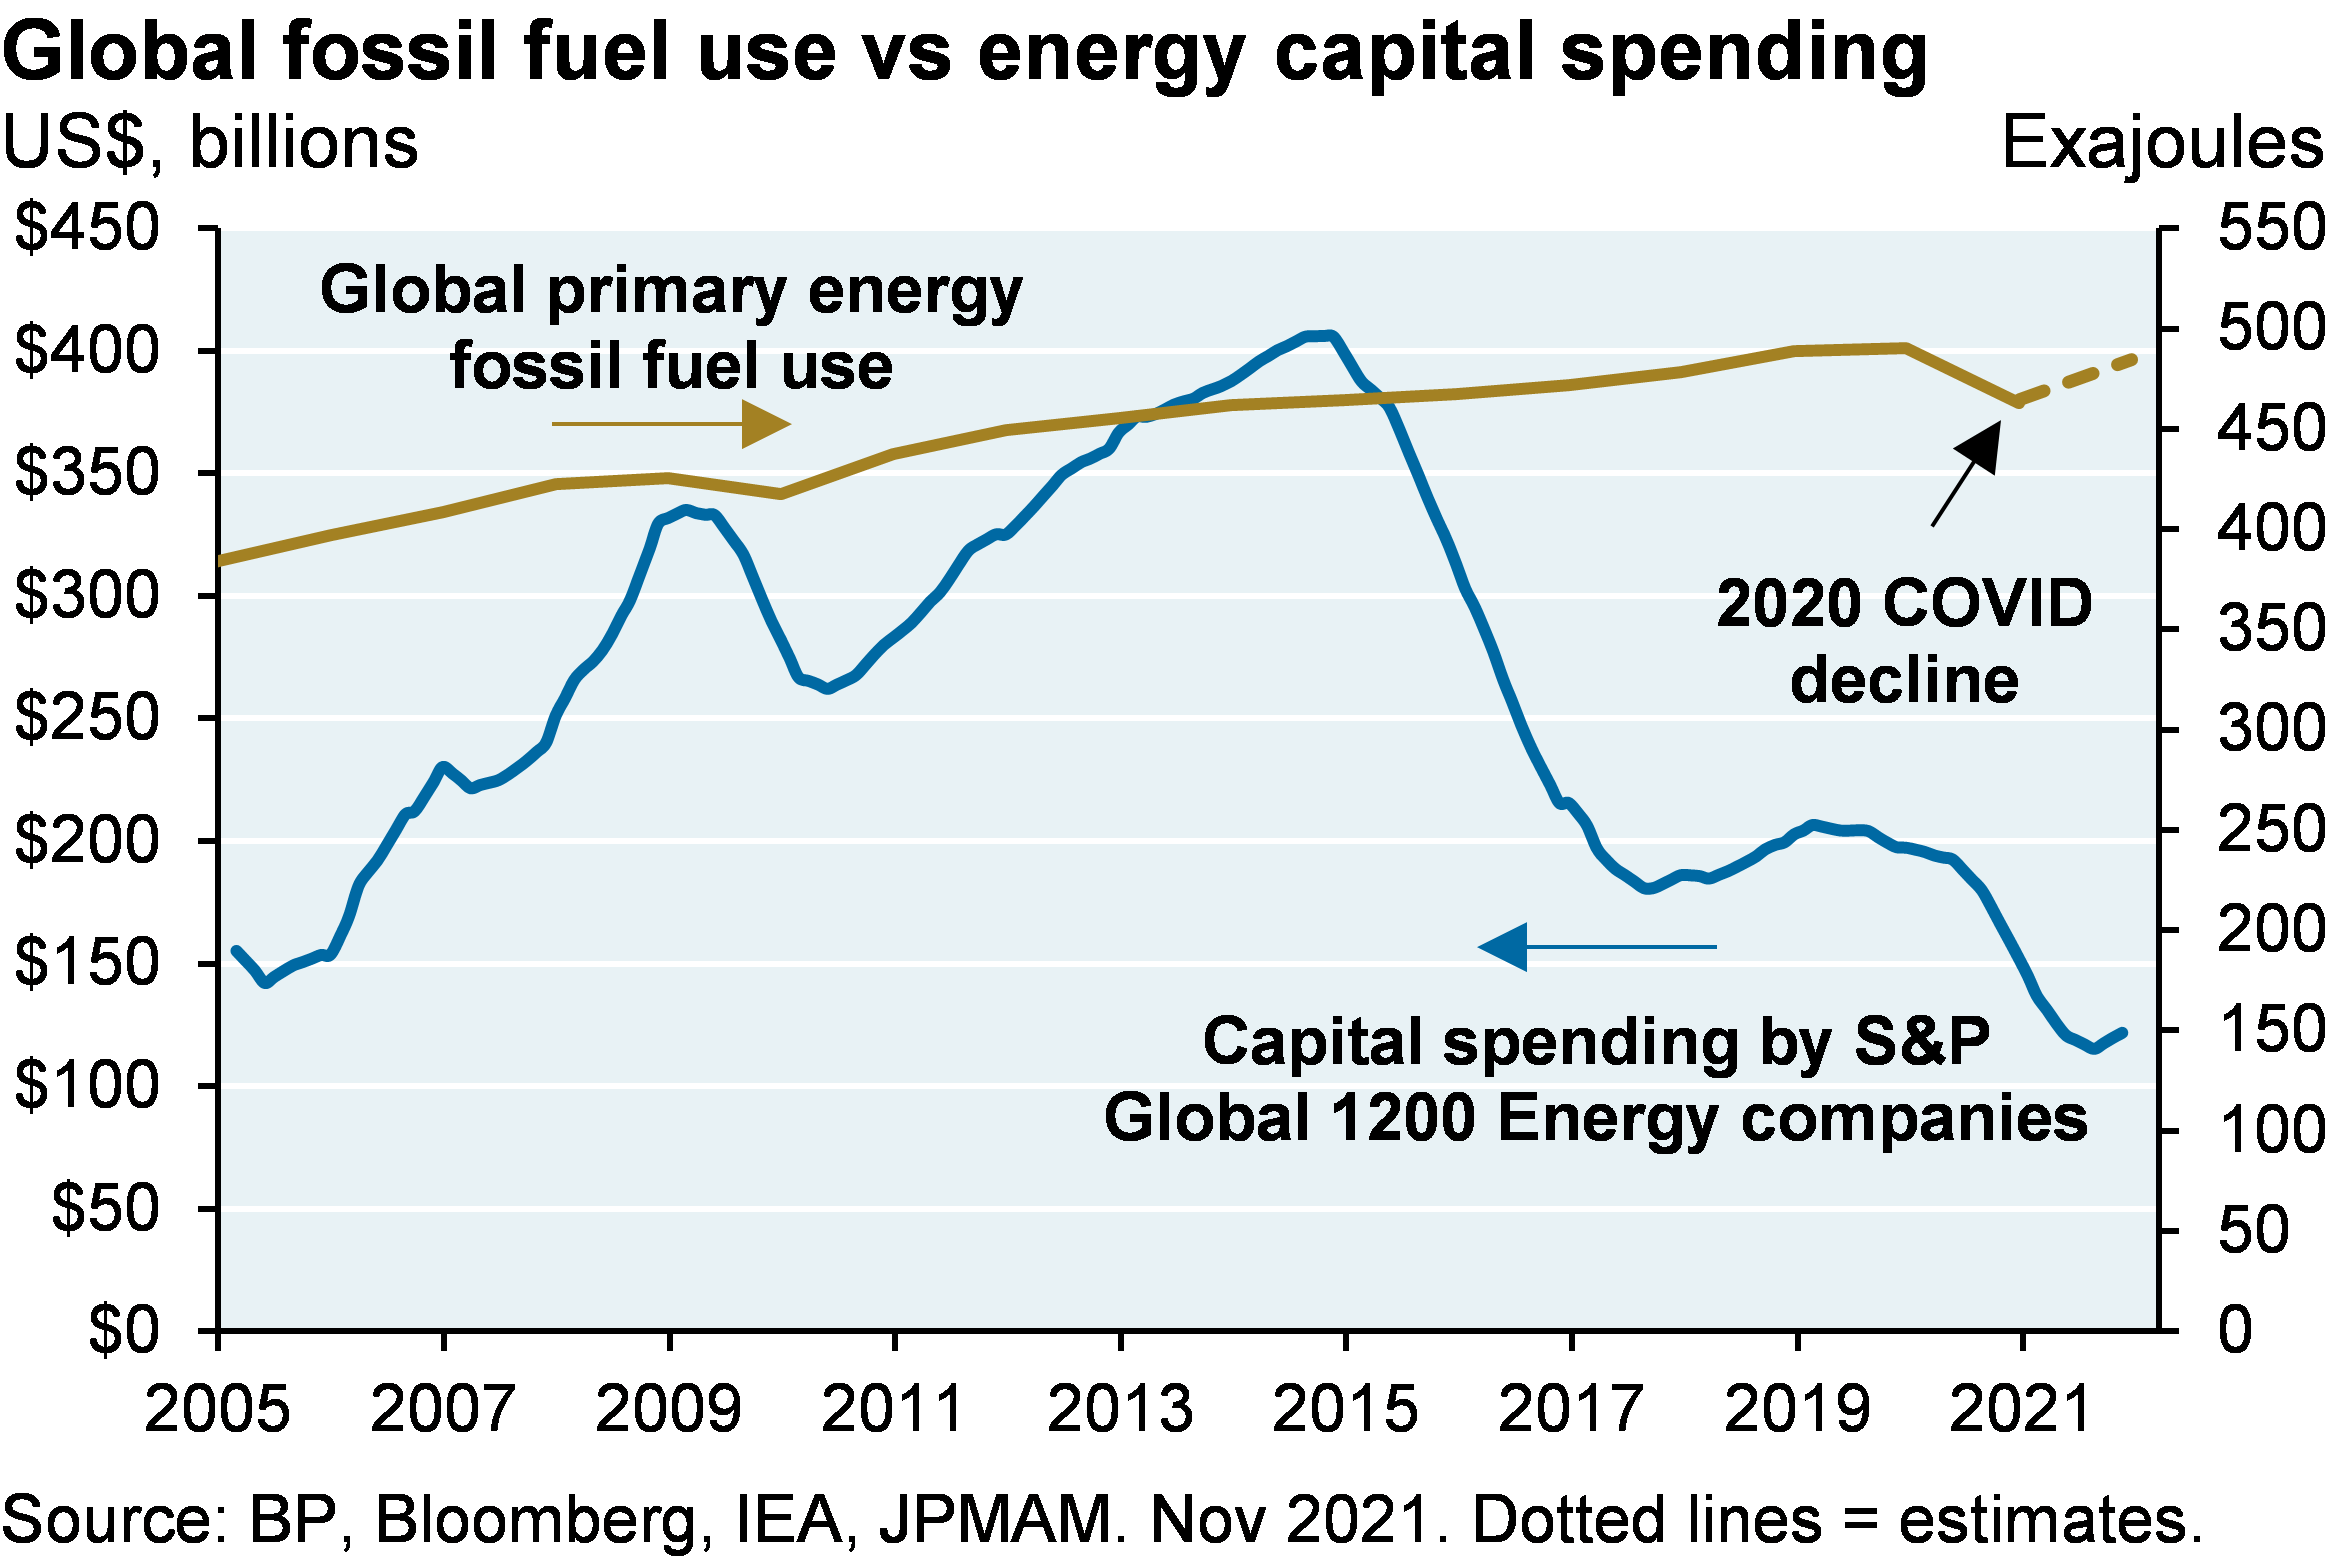 Line chart which shows global fossil fuel use versus capital spending by S&P Global 1200 Energy companies. The chart shows that while capital spending by energy companies has fallen significantly, fossil fuel use has been relatively flat.